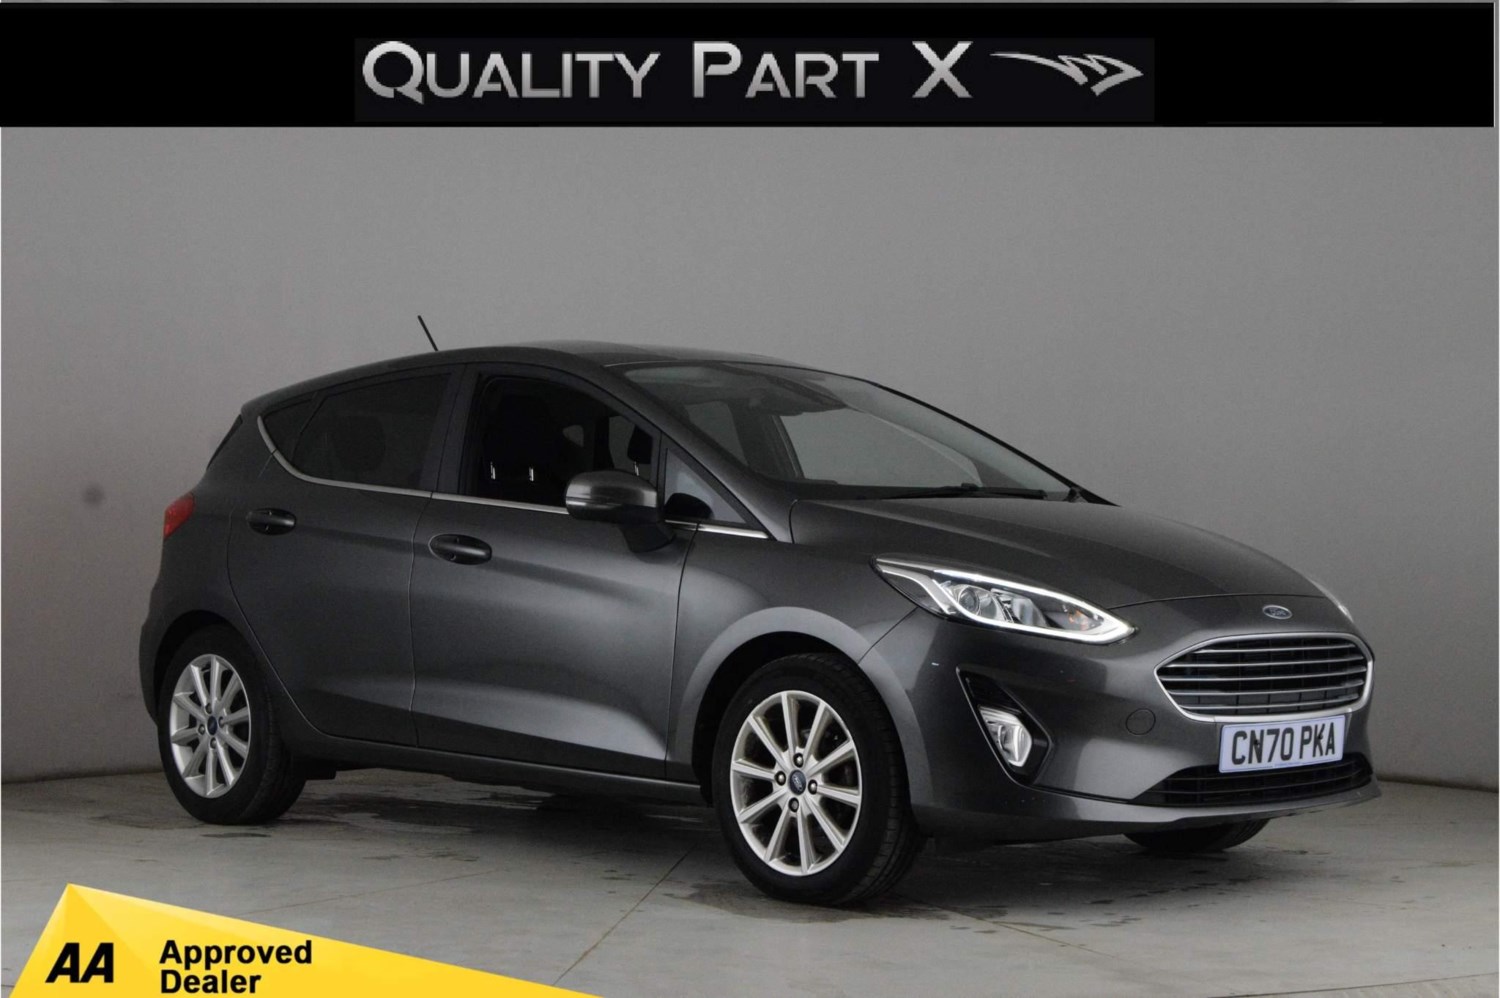 2020 used Ford Fiesta 1.0T EcoBoost Titanium Euro 6 (s/s) 5dr